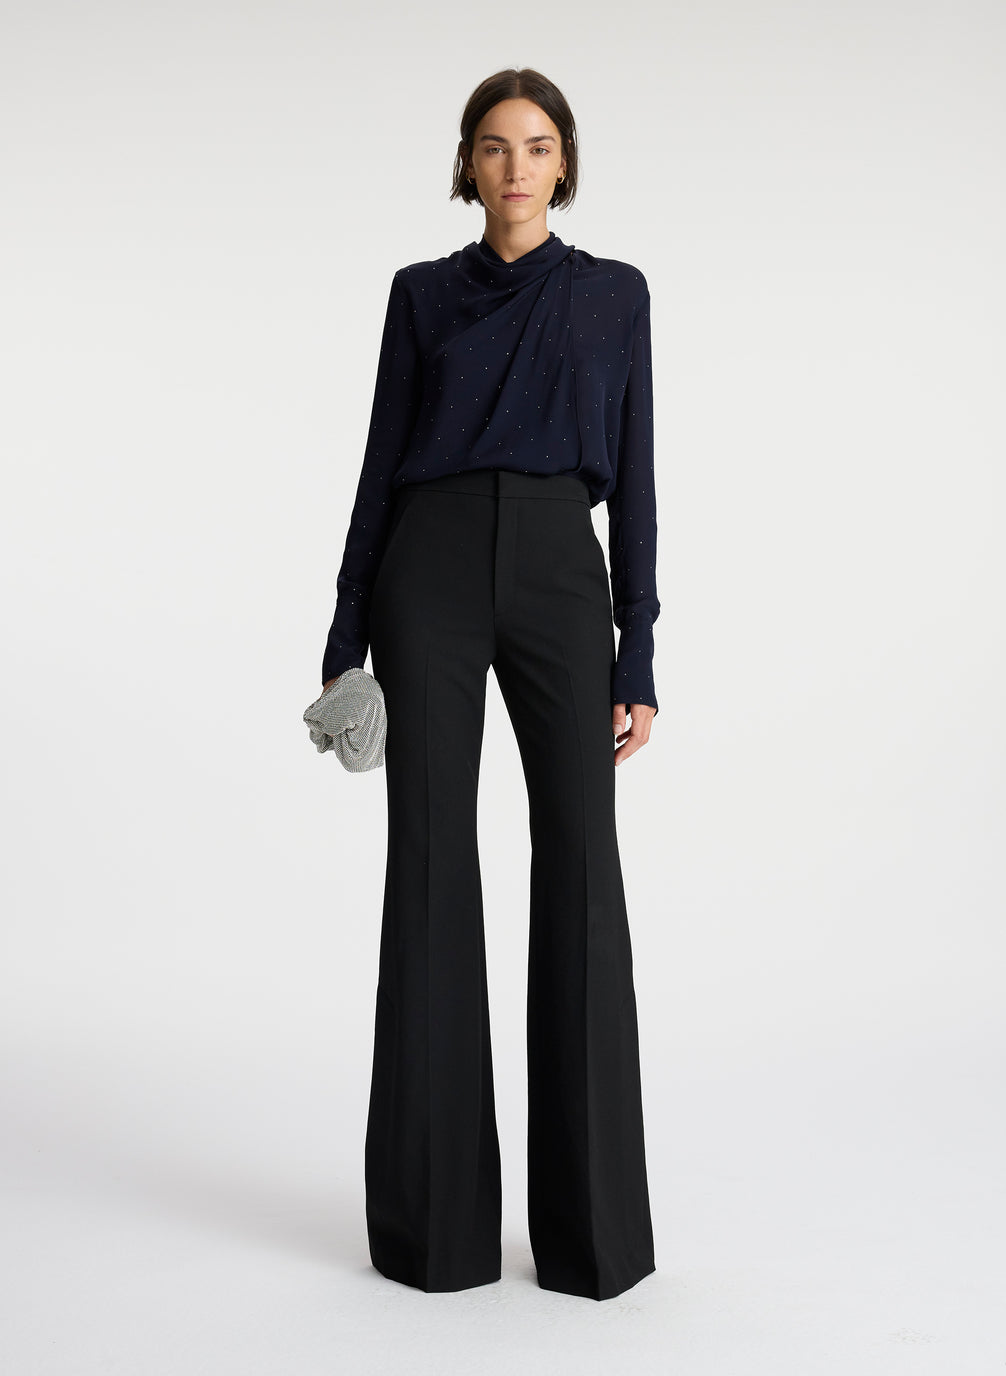 front view of woman wearing navy blue silk long sleeve top with crystal embellishments and black pants